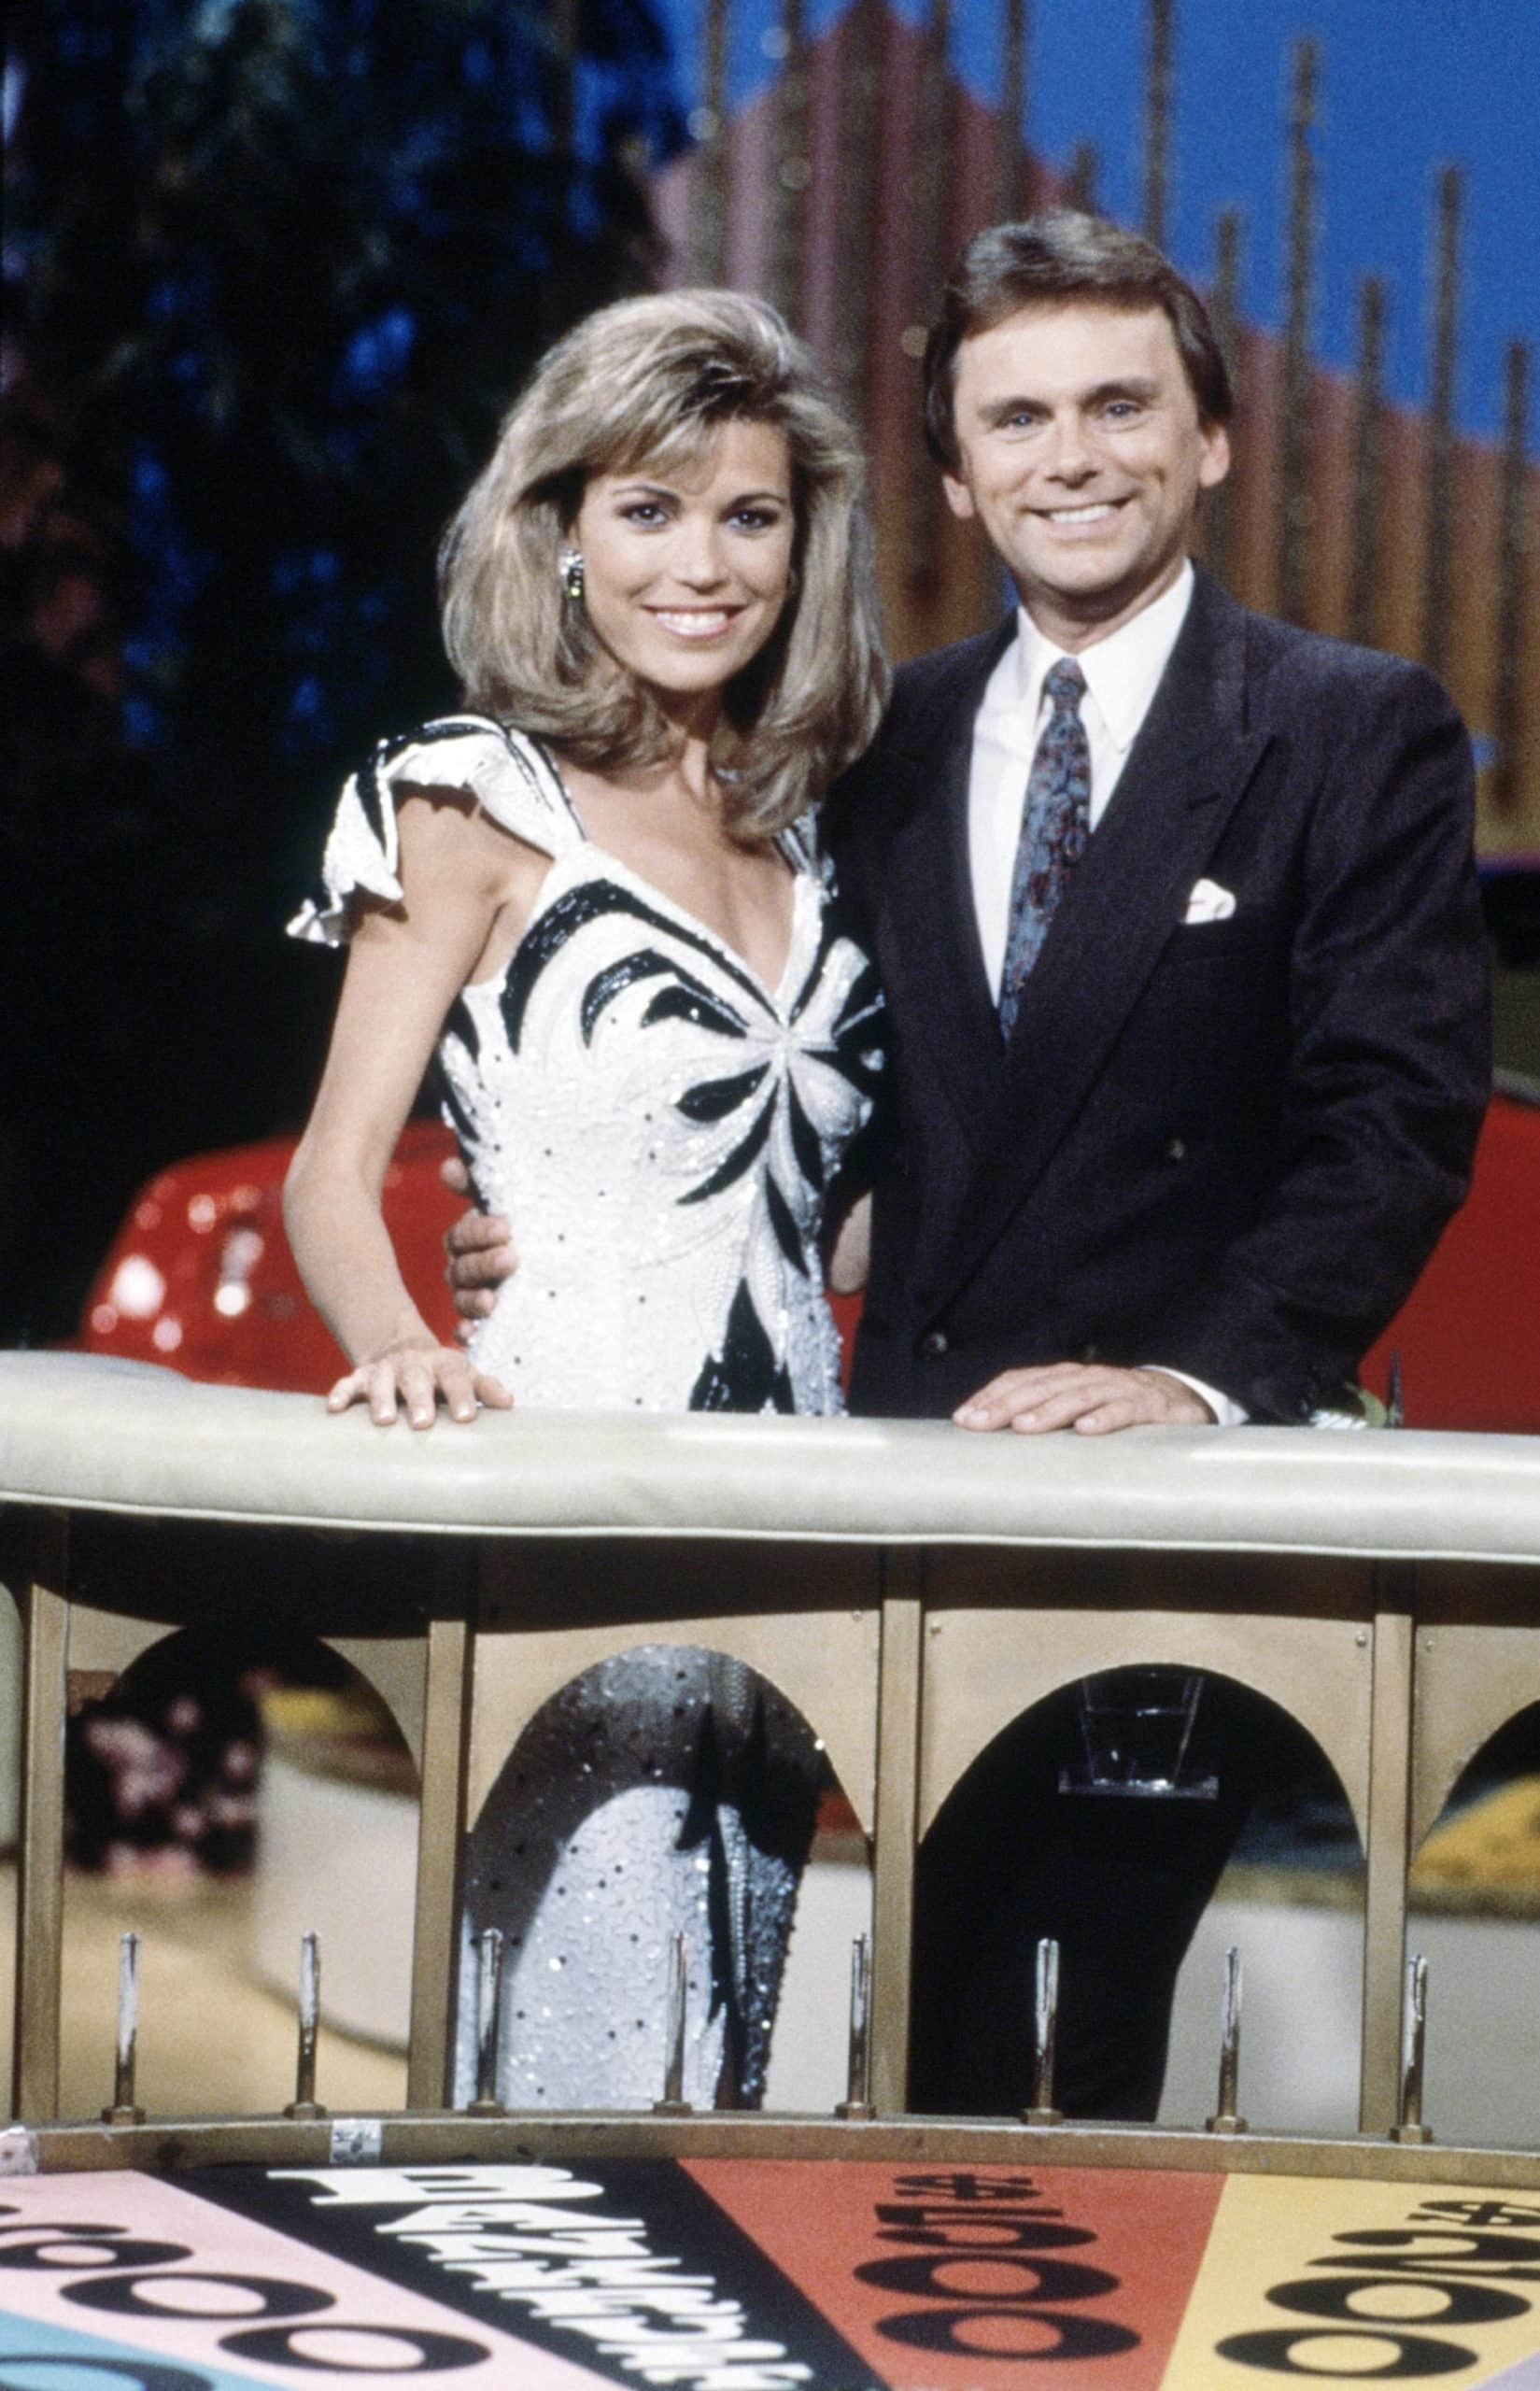 WHEEL OF FORTUNE, from left: Vanna White, Pat Sajak, (1980s), 1975-